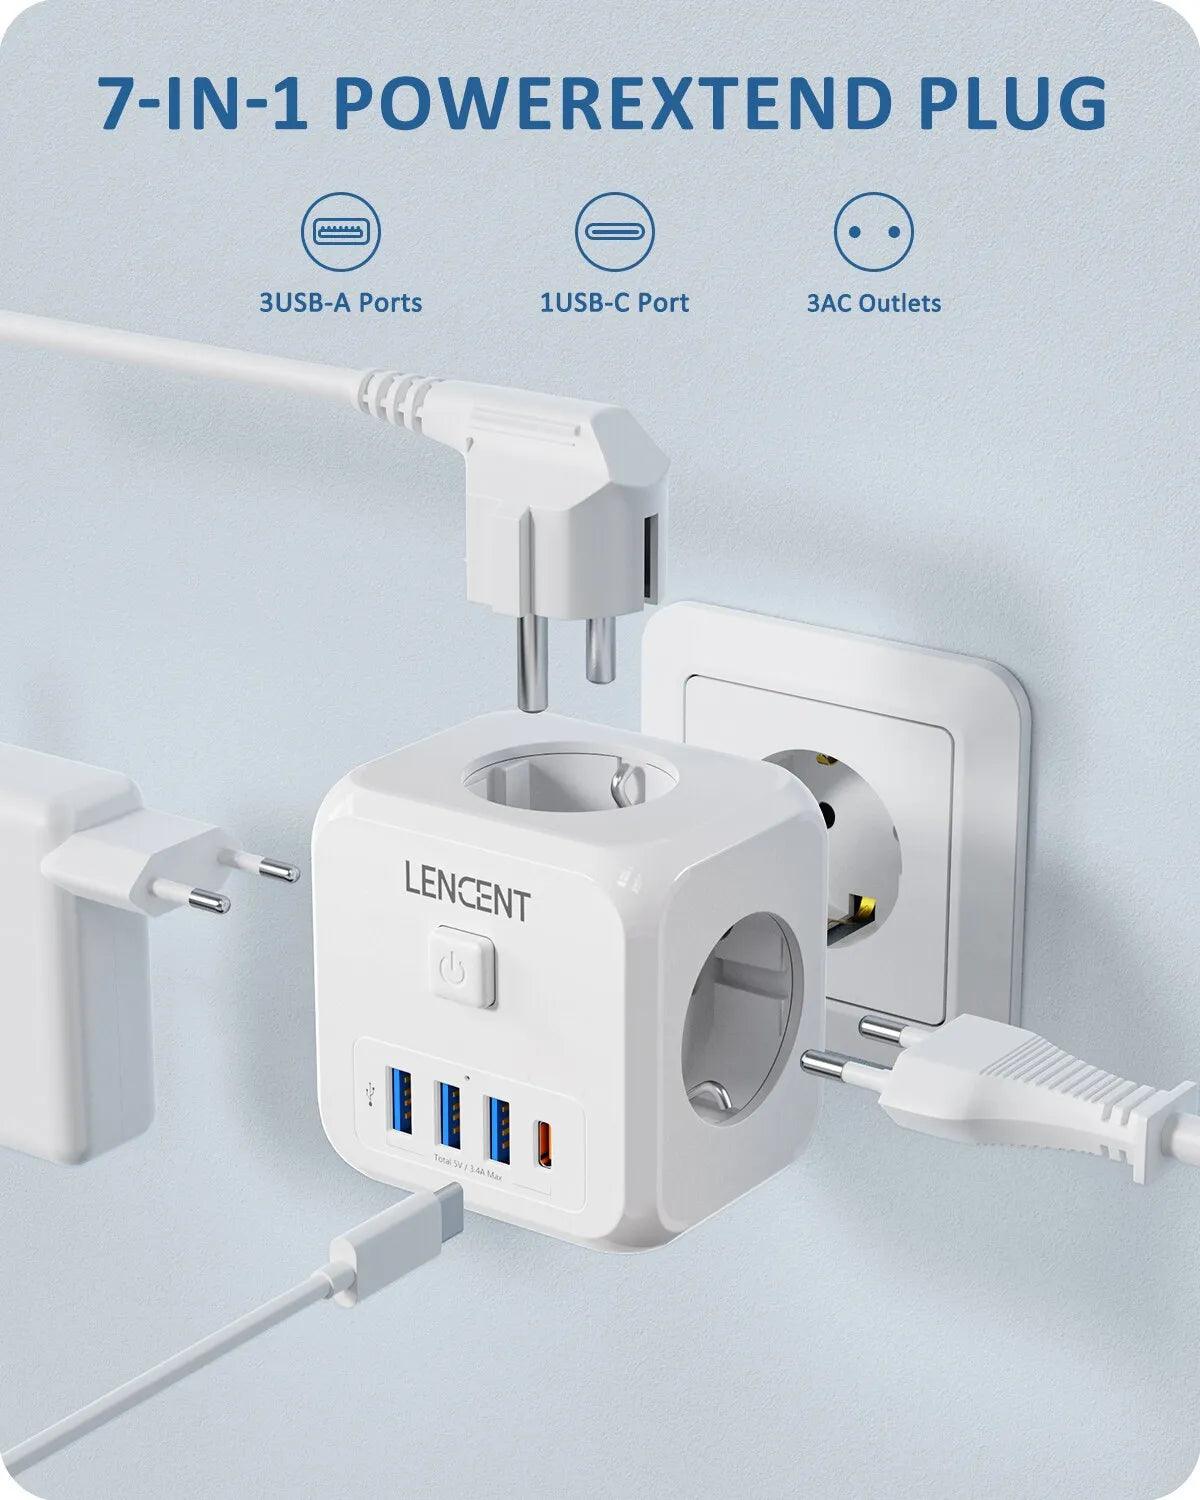 Smart Multi-Plug Charger with 3 AC Outlets, 3 USB Ports, and Type C Port  ourlum.com   